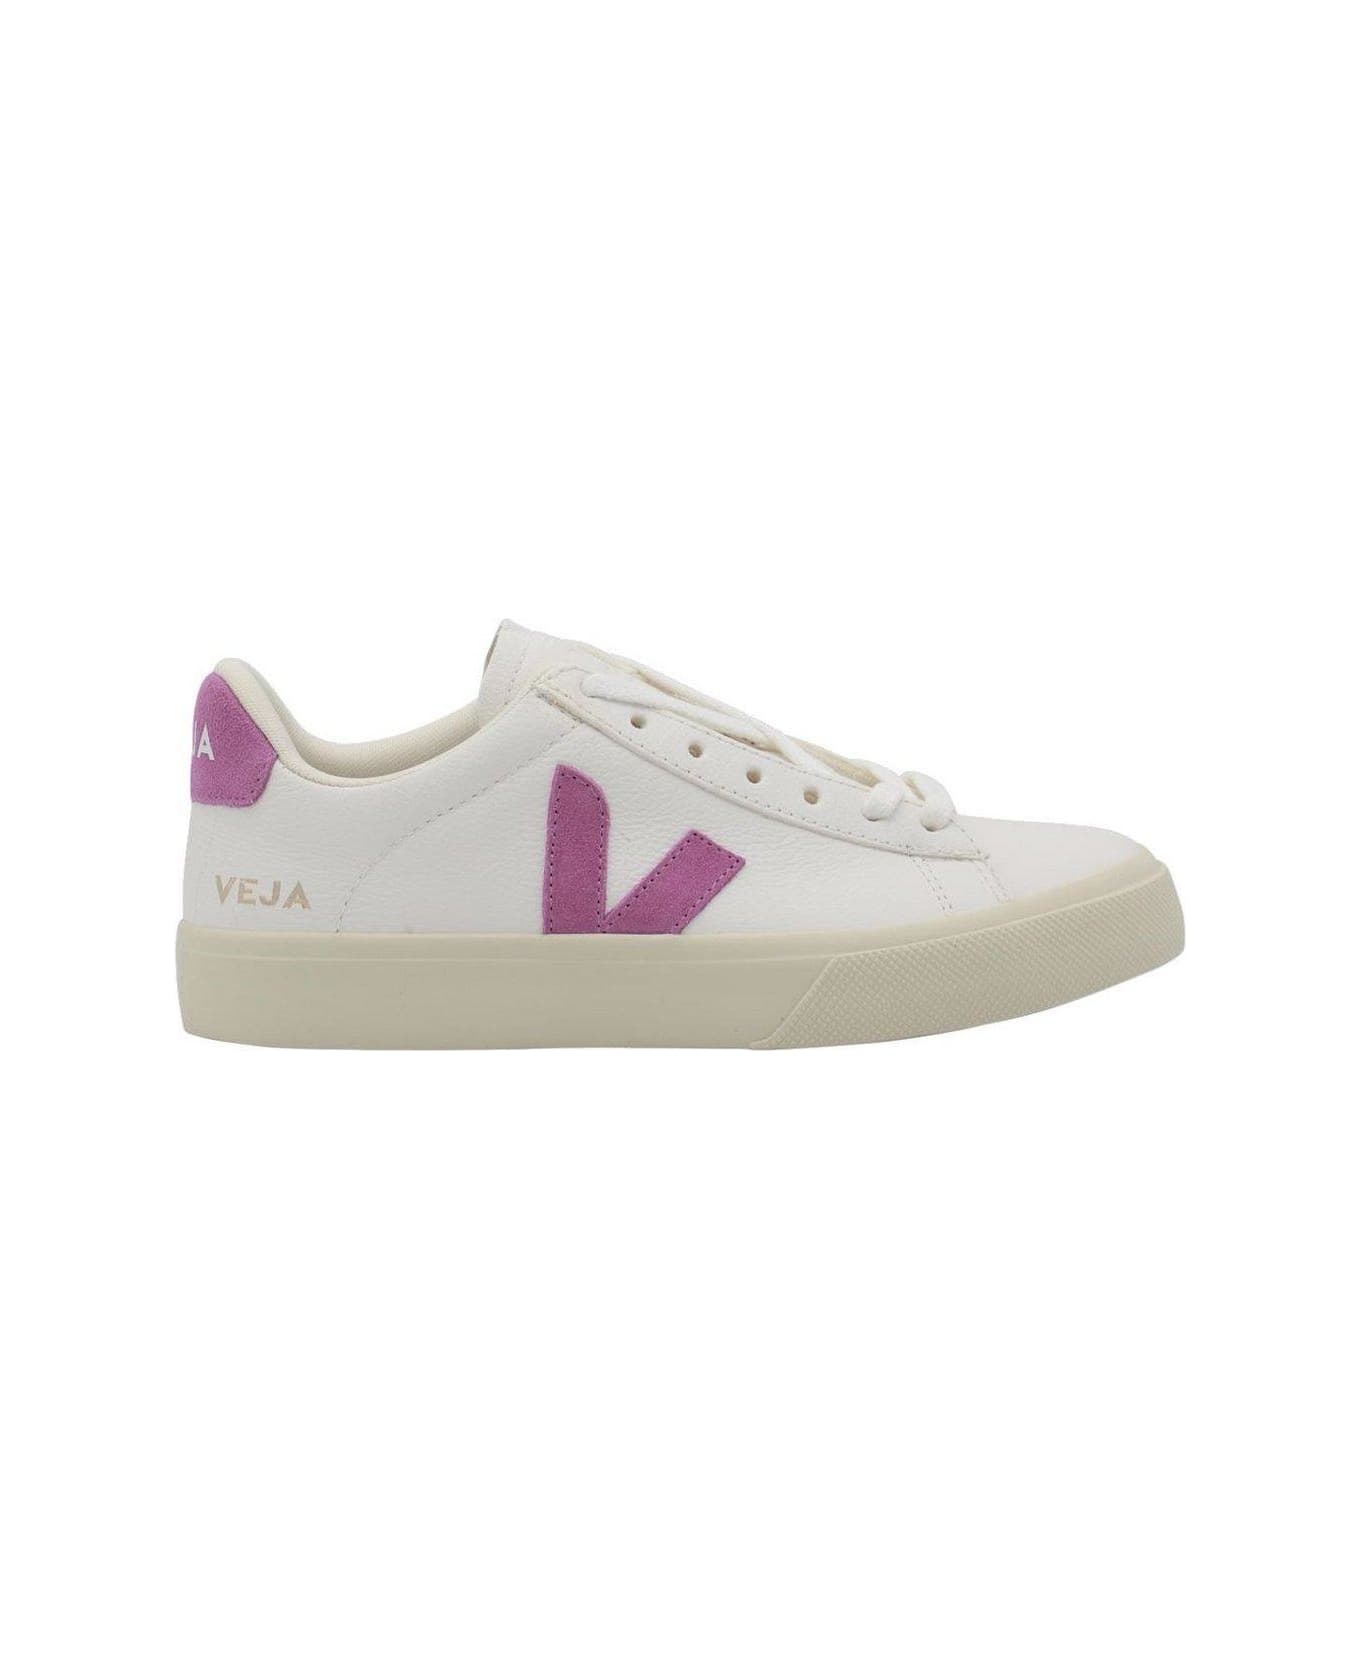 Veja Campo Logo Patch Sneakers スニーカー